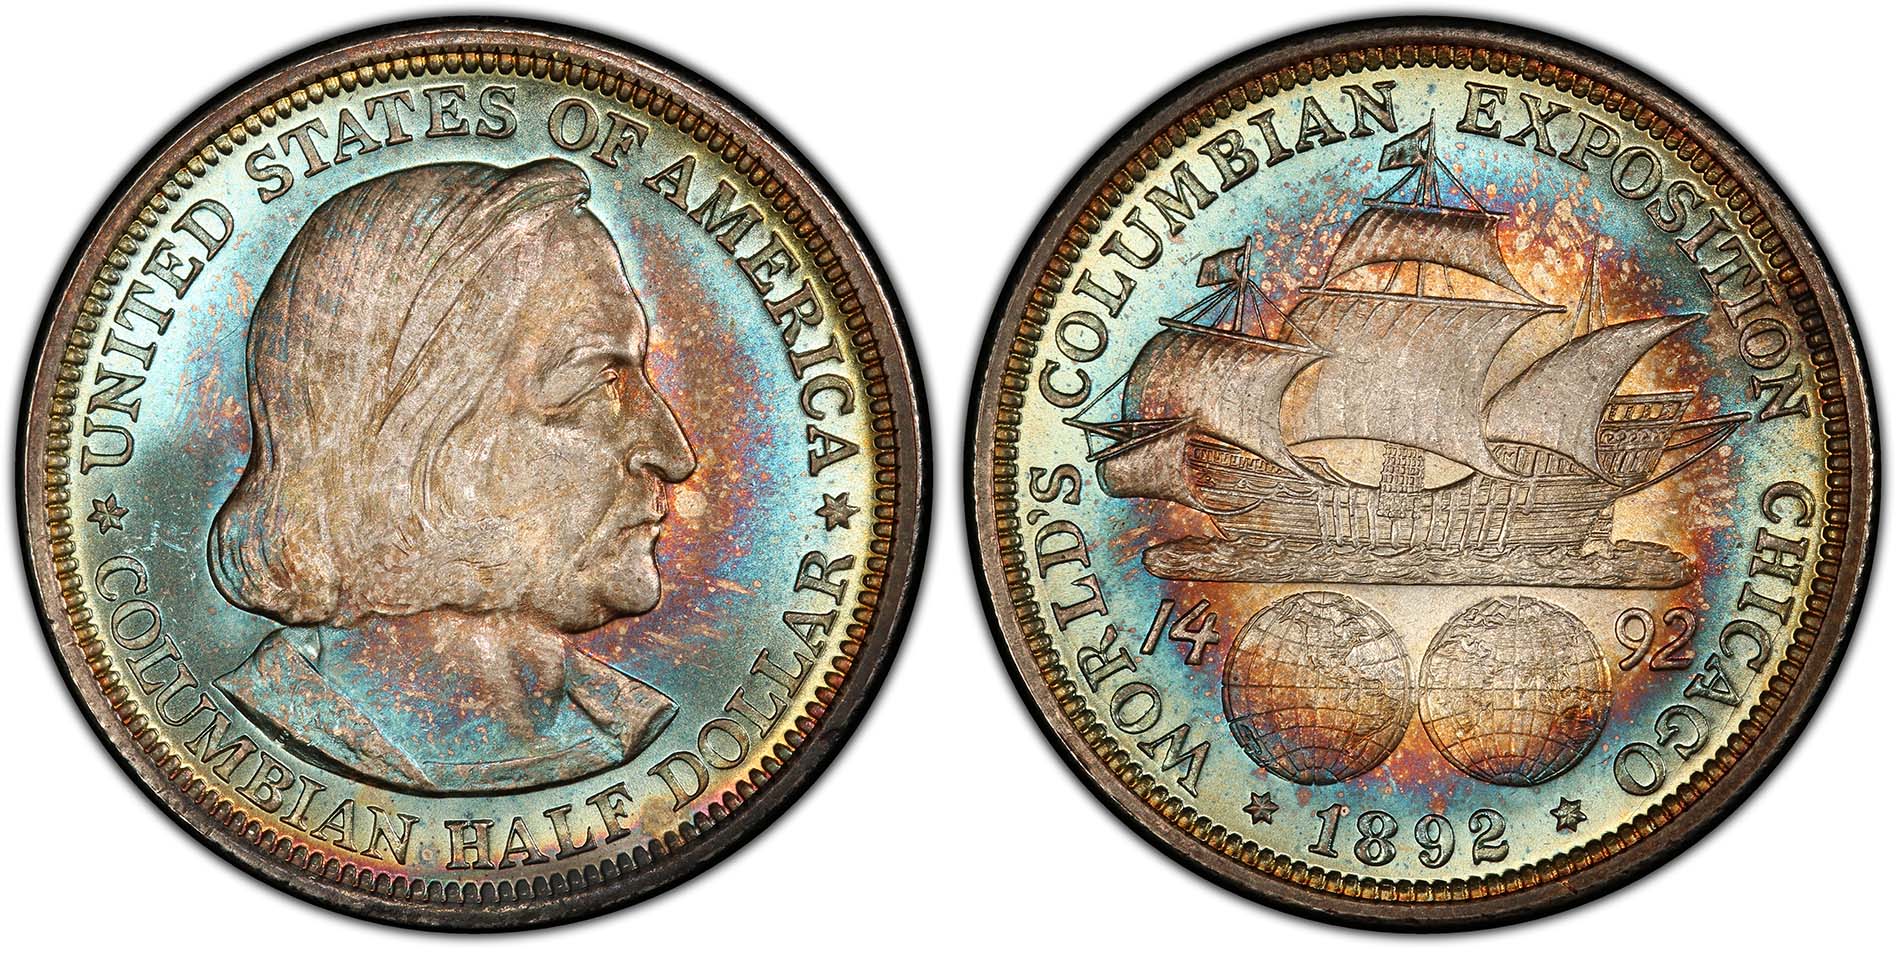 Why Numismatists Should Embrace Crossover Collectibles